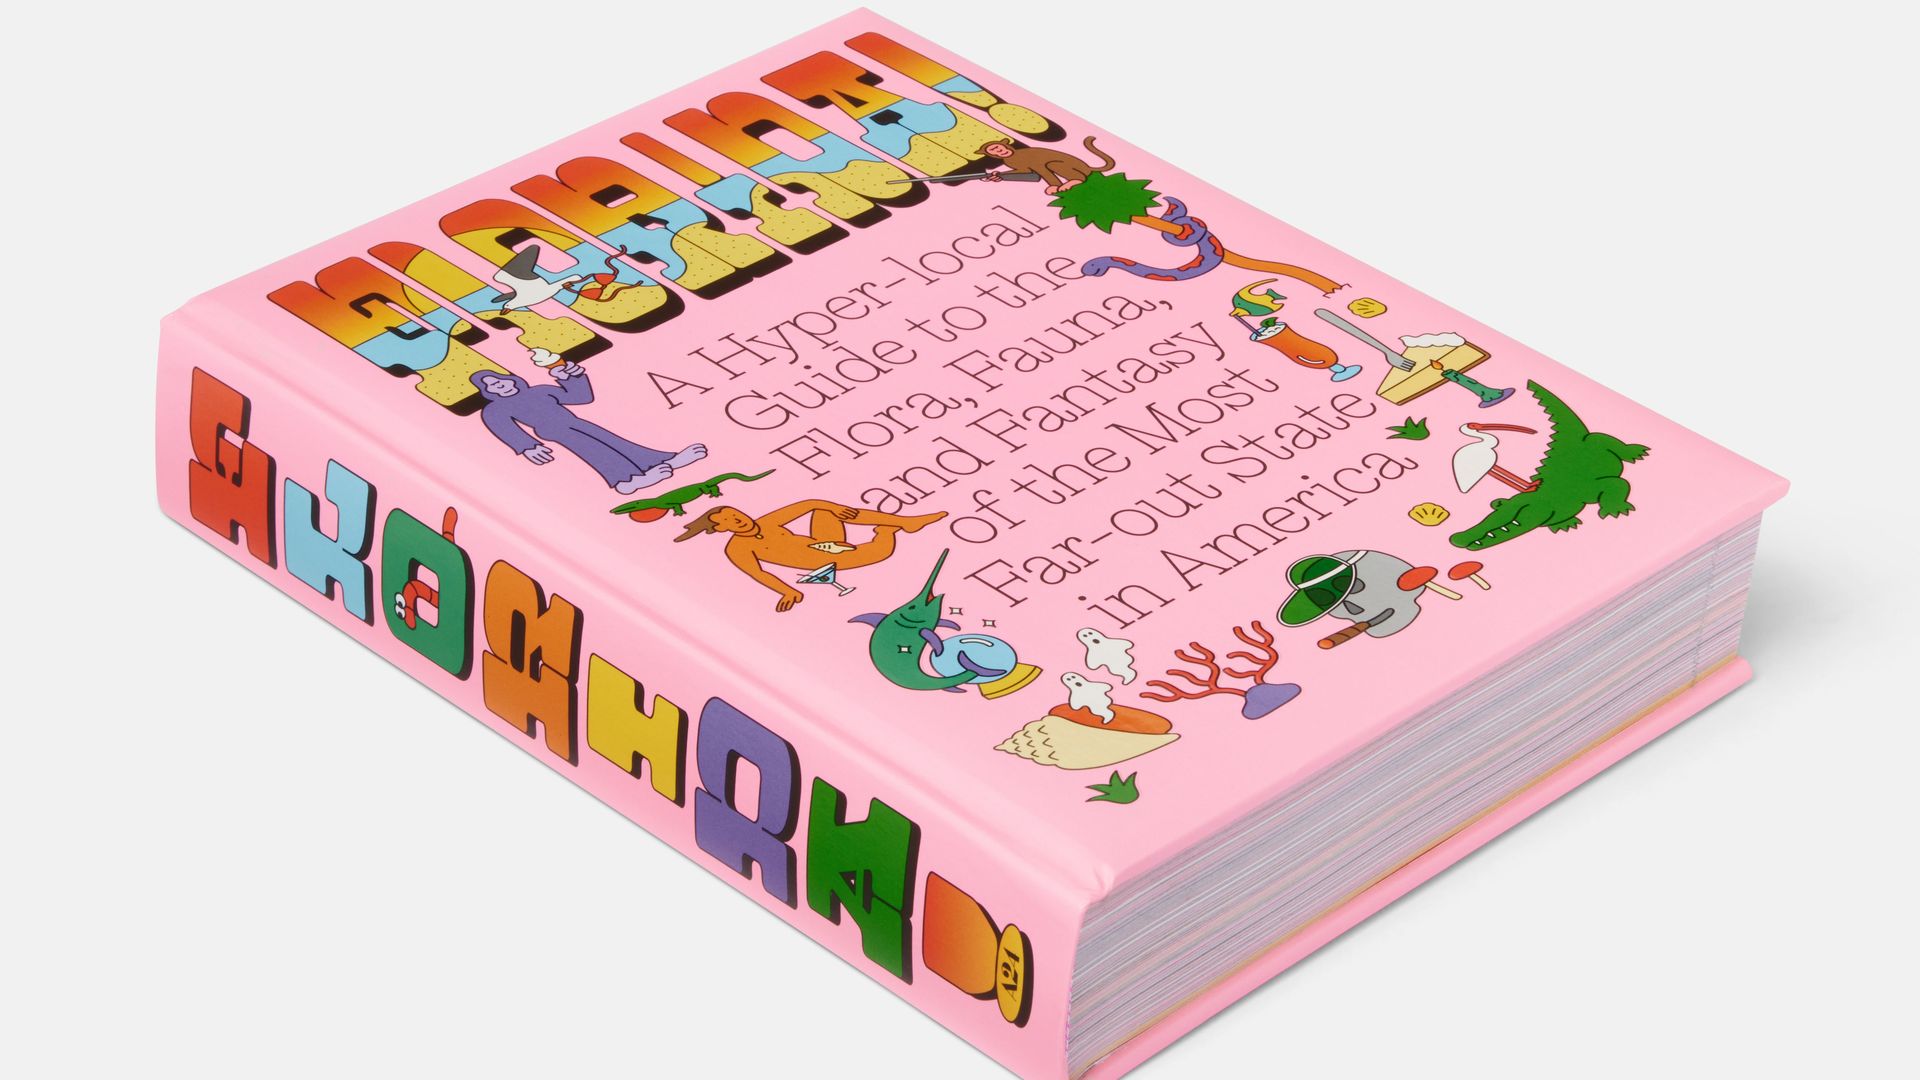 A pink book titled "Florida!" is photographed.